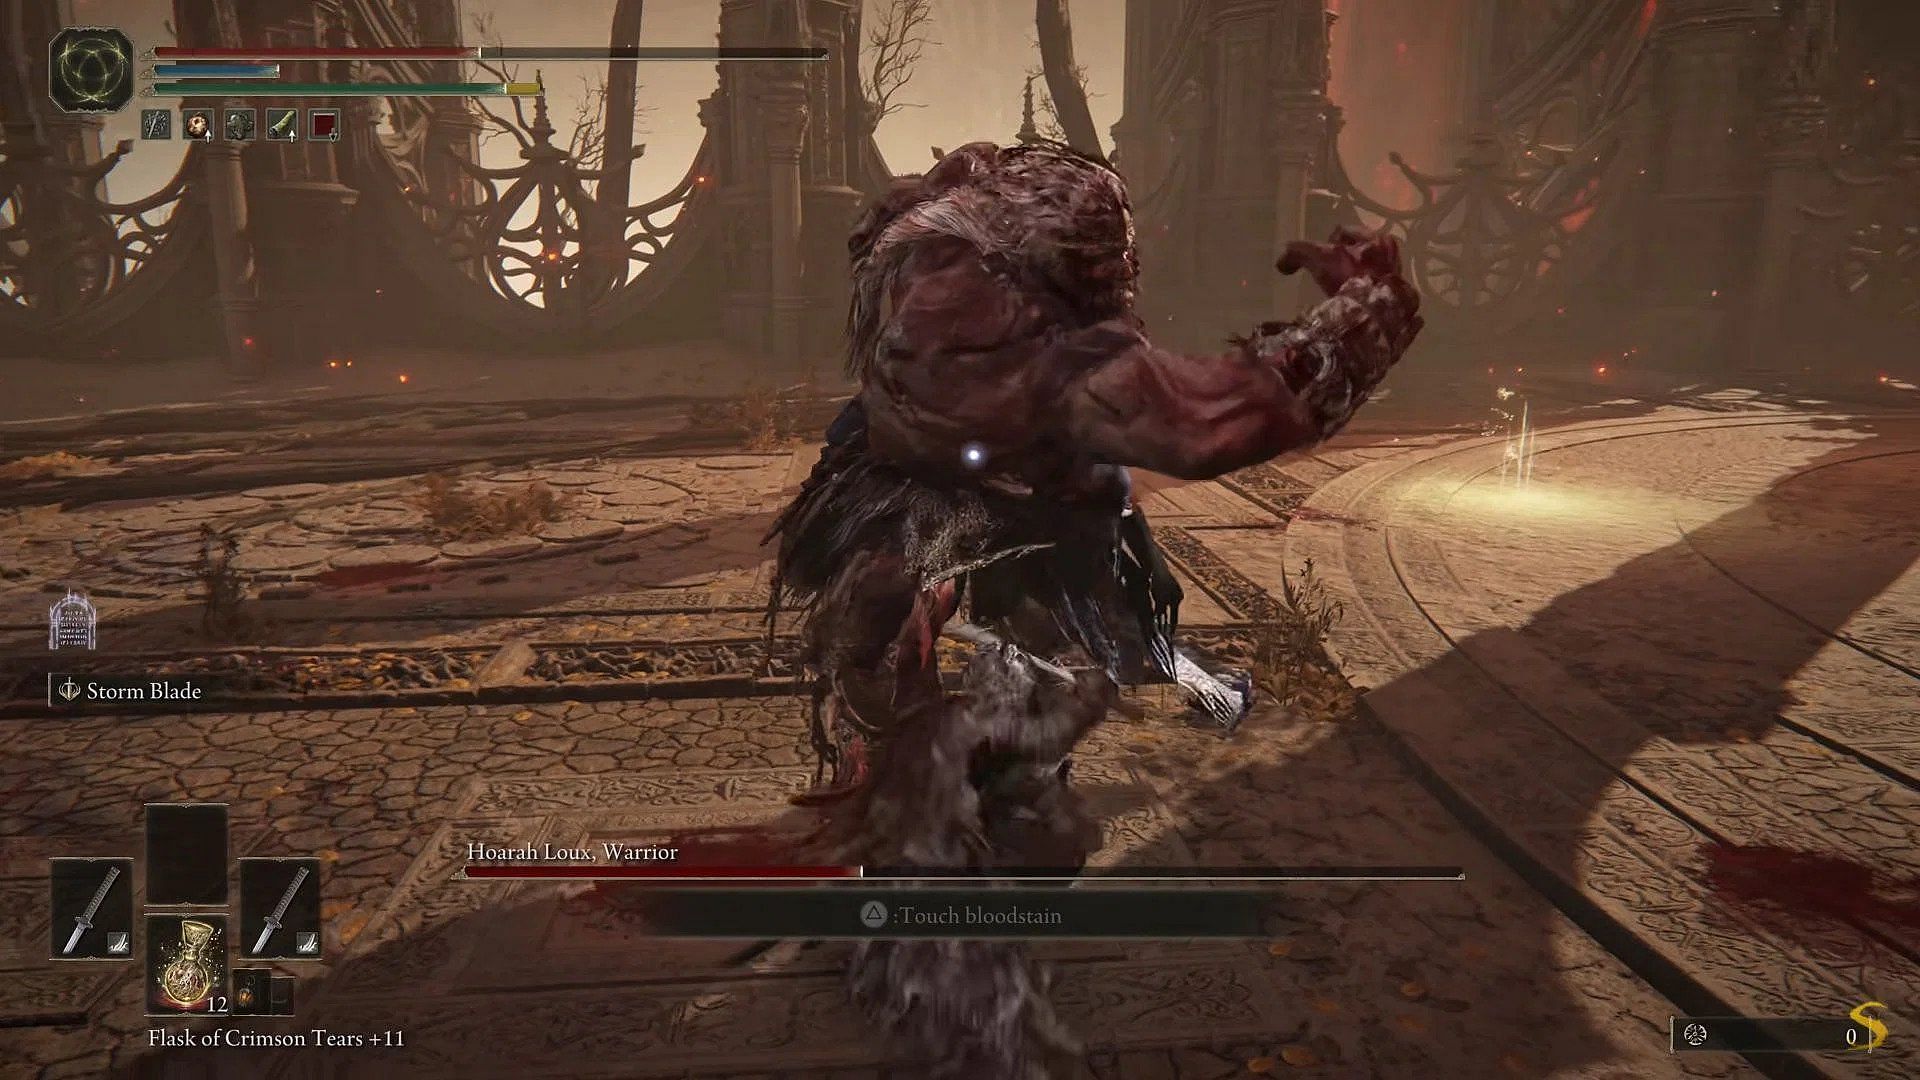 The fight against Hoarah Loux in Elden Ring is a pure adrenaline rush that players need to keep up with till the end (Image via Shirrako/Youtube)